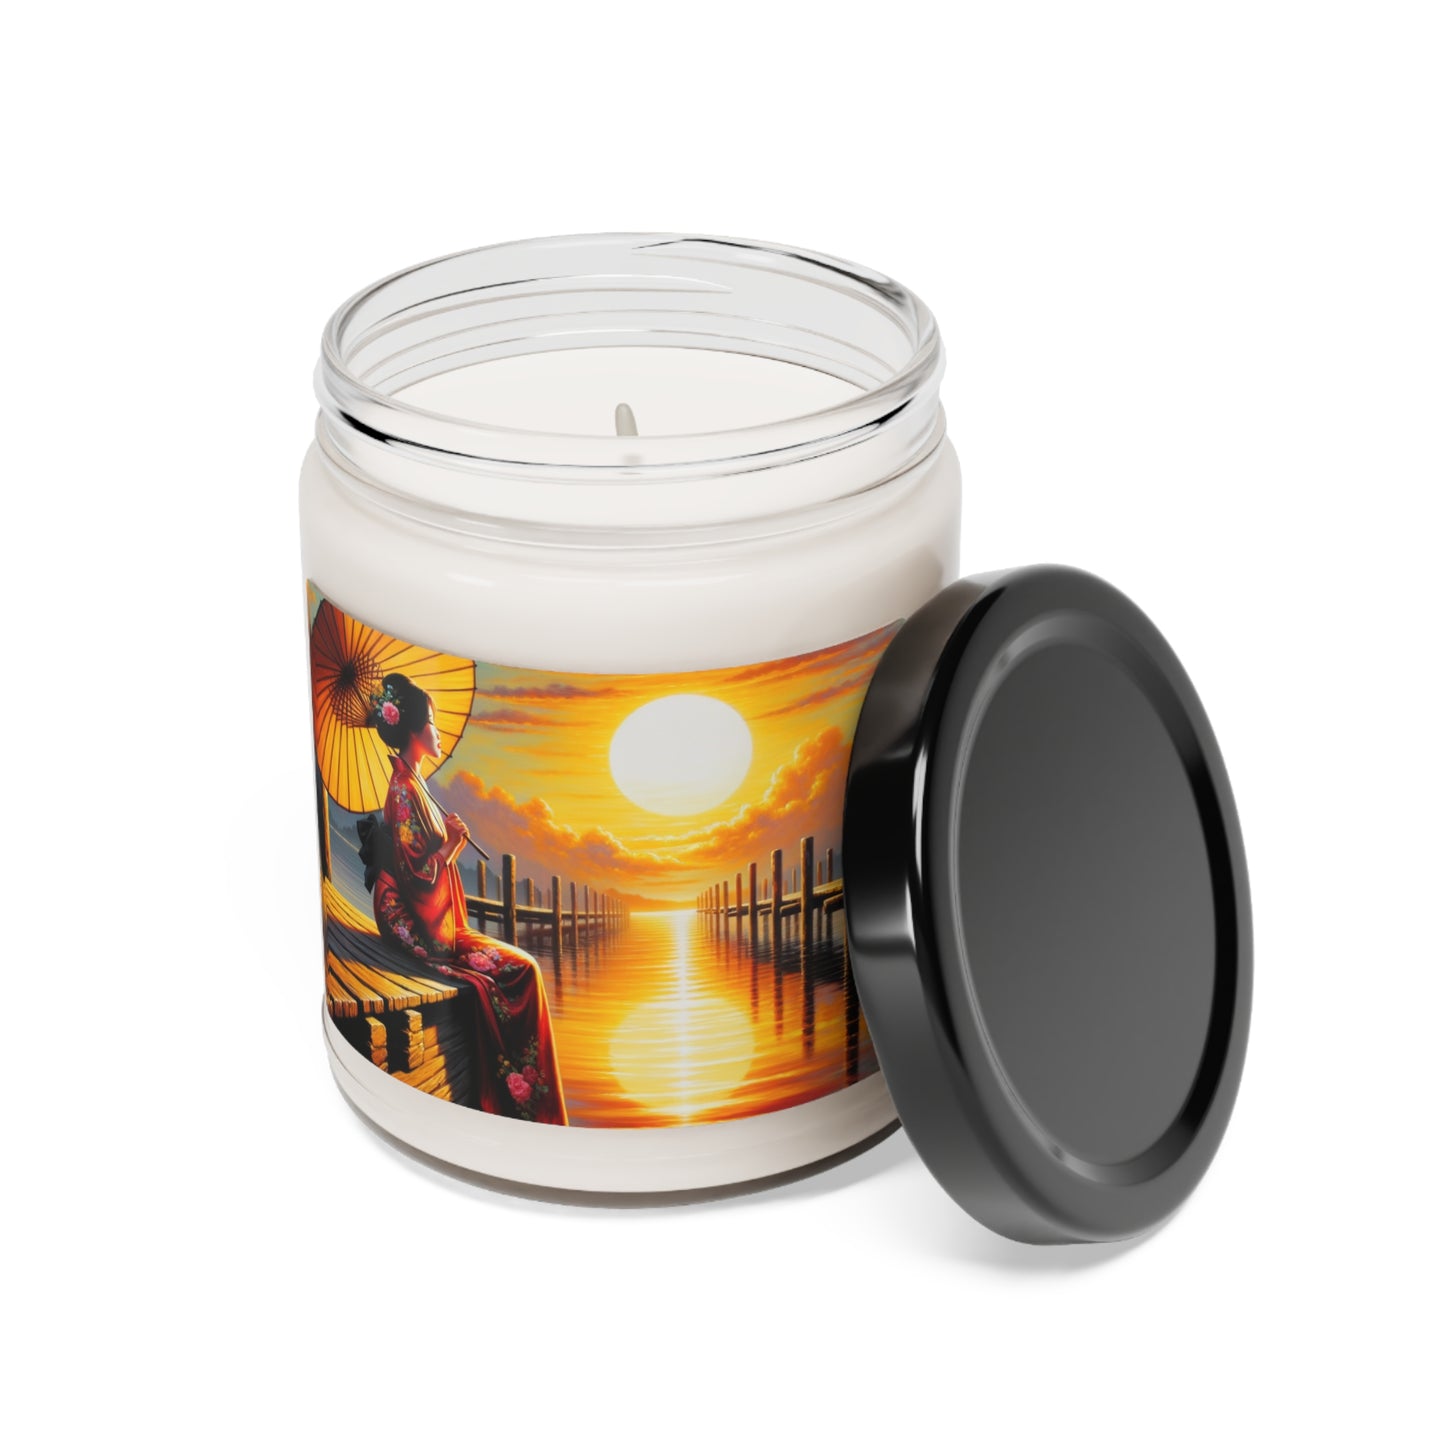 "Golden Reflections" - The Alien Scented Soy Candle 9oz Impressionism Style